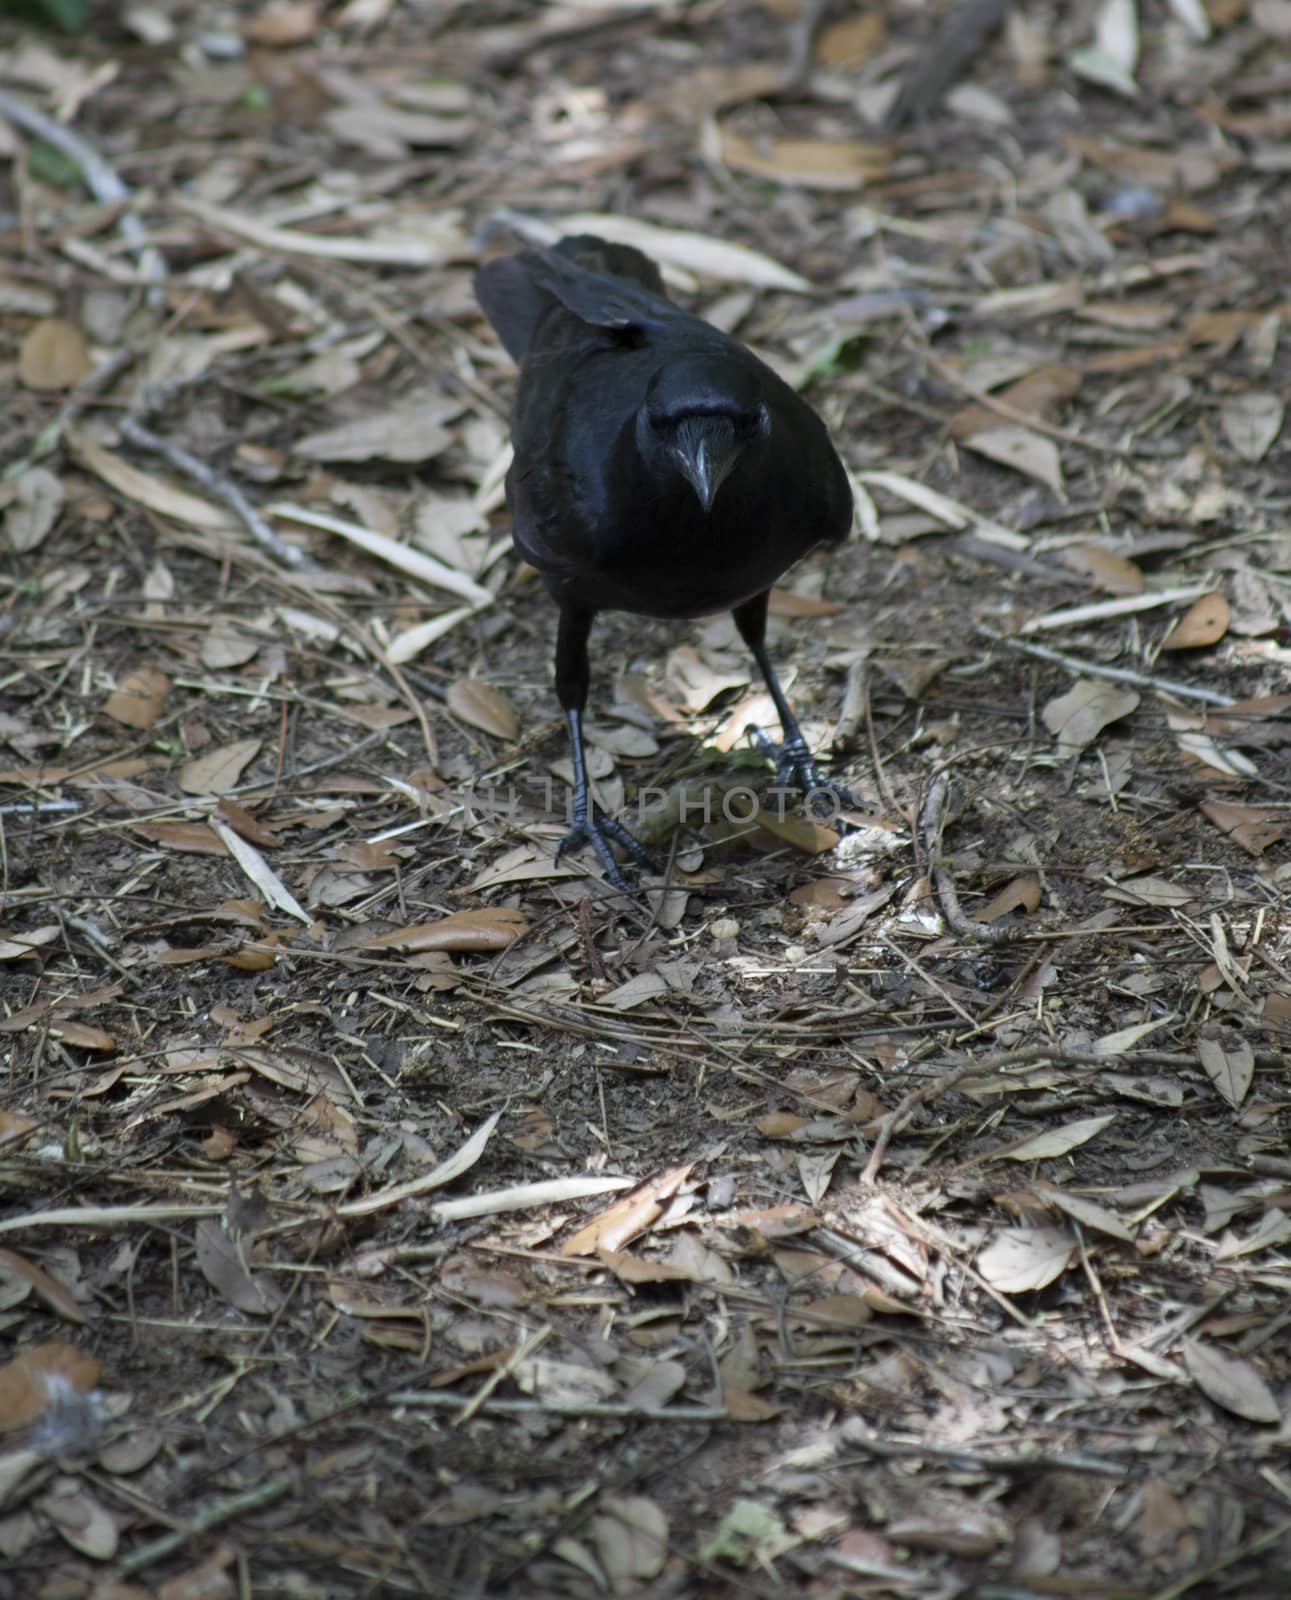 Crow hopping along the ground